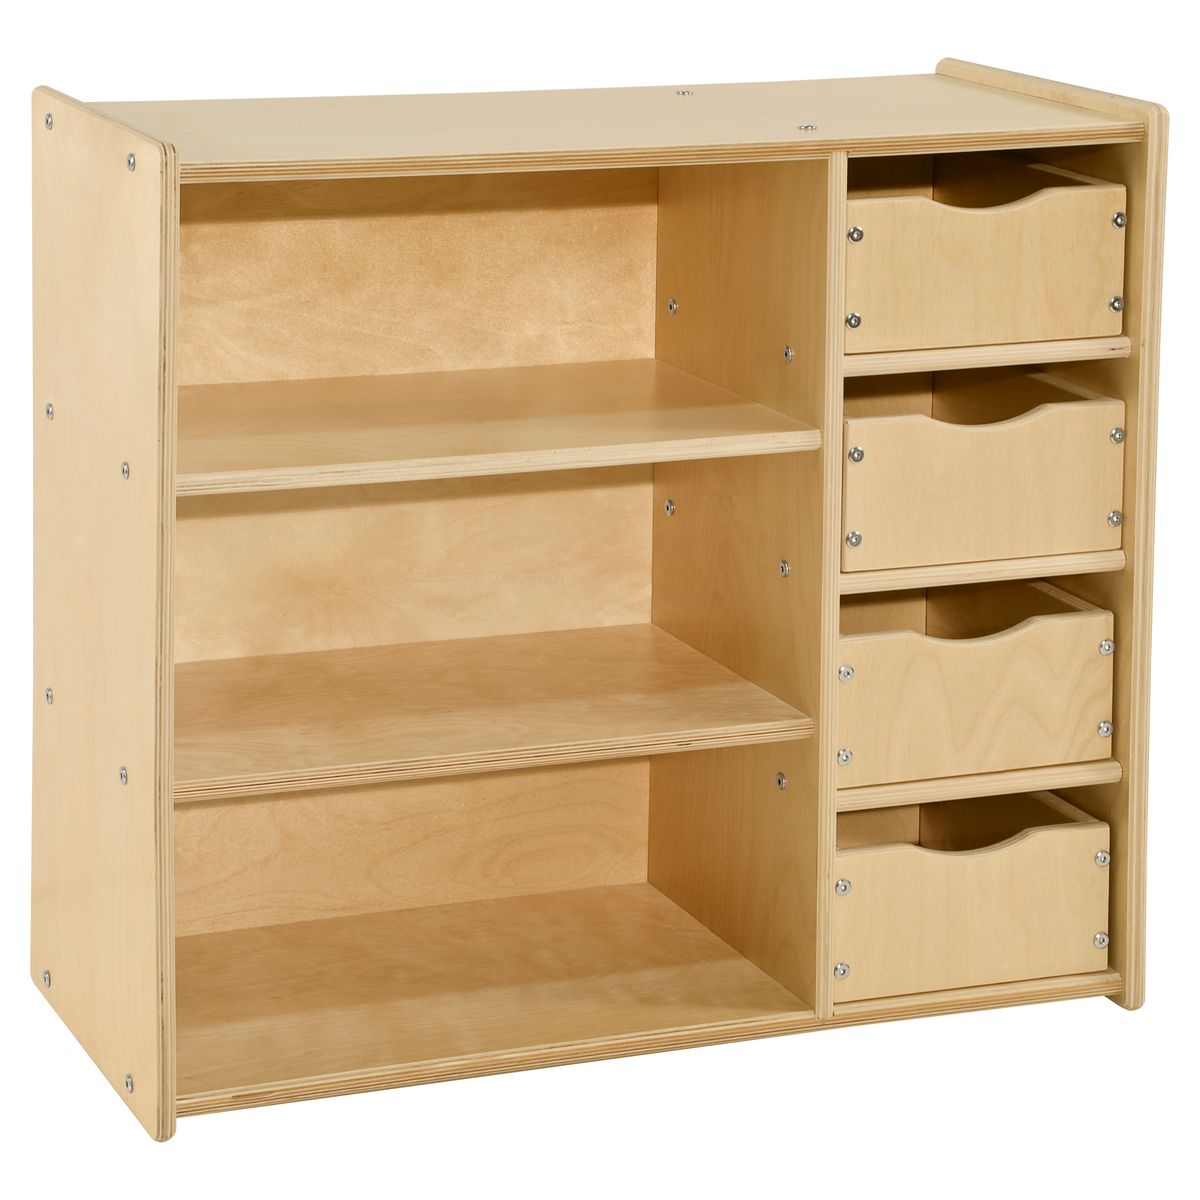 Picture of Contender C14475 Storage Center with Drawers - RTA